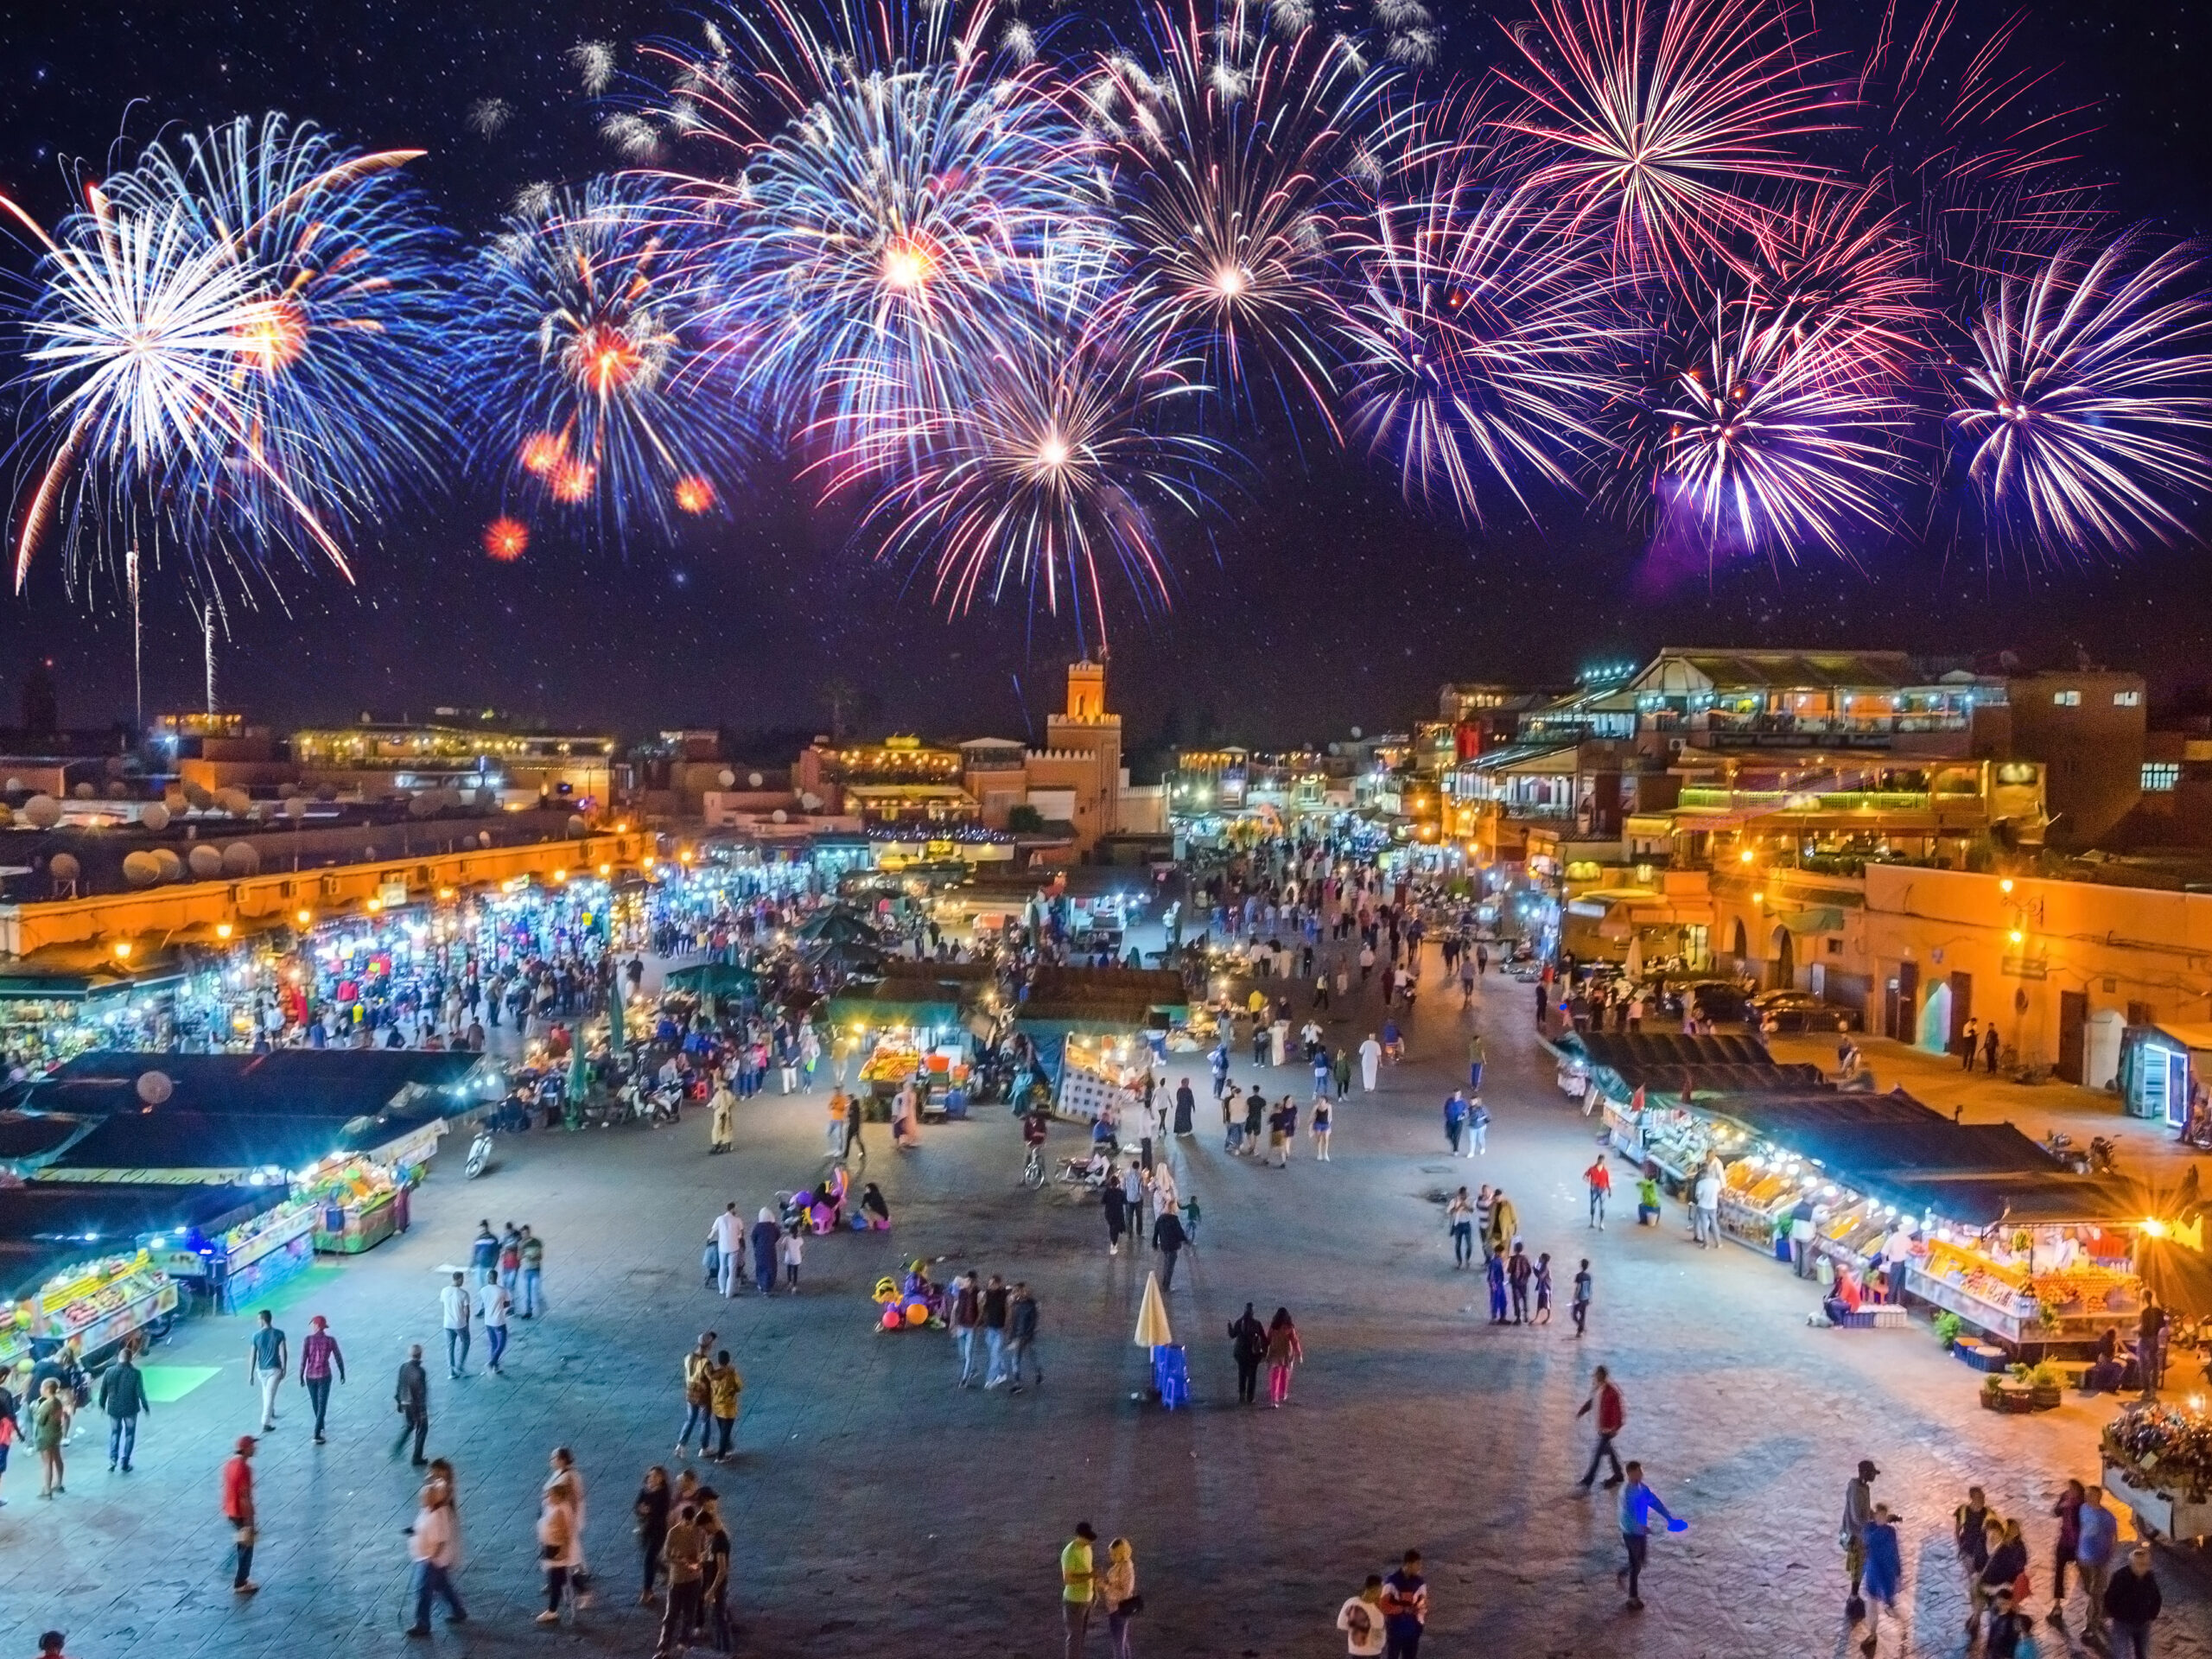 cheapest places to celebrate new year around the world - Marrakech, Morocco